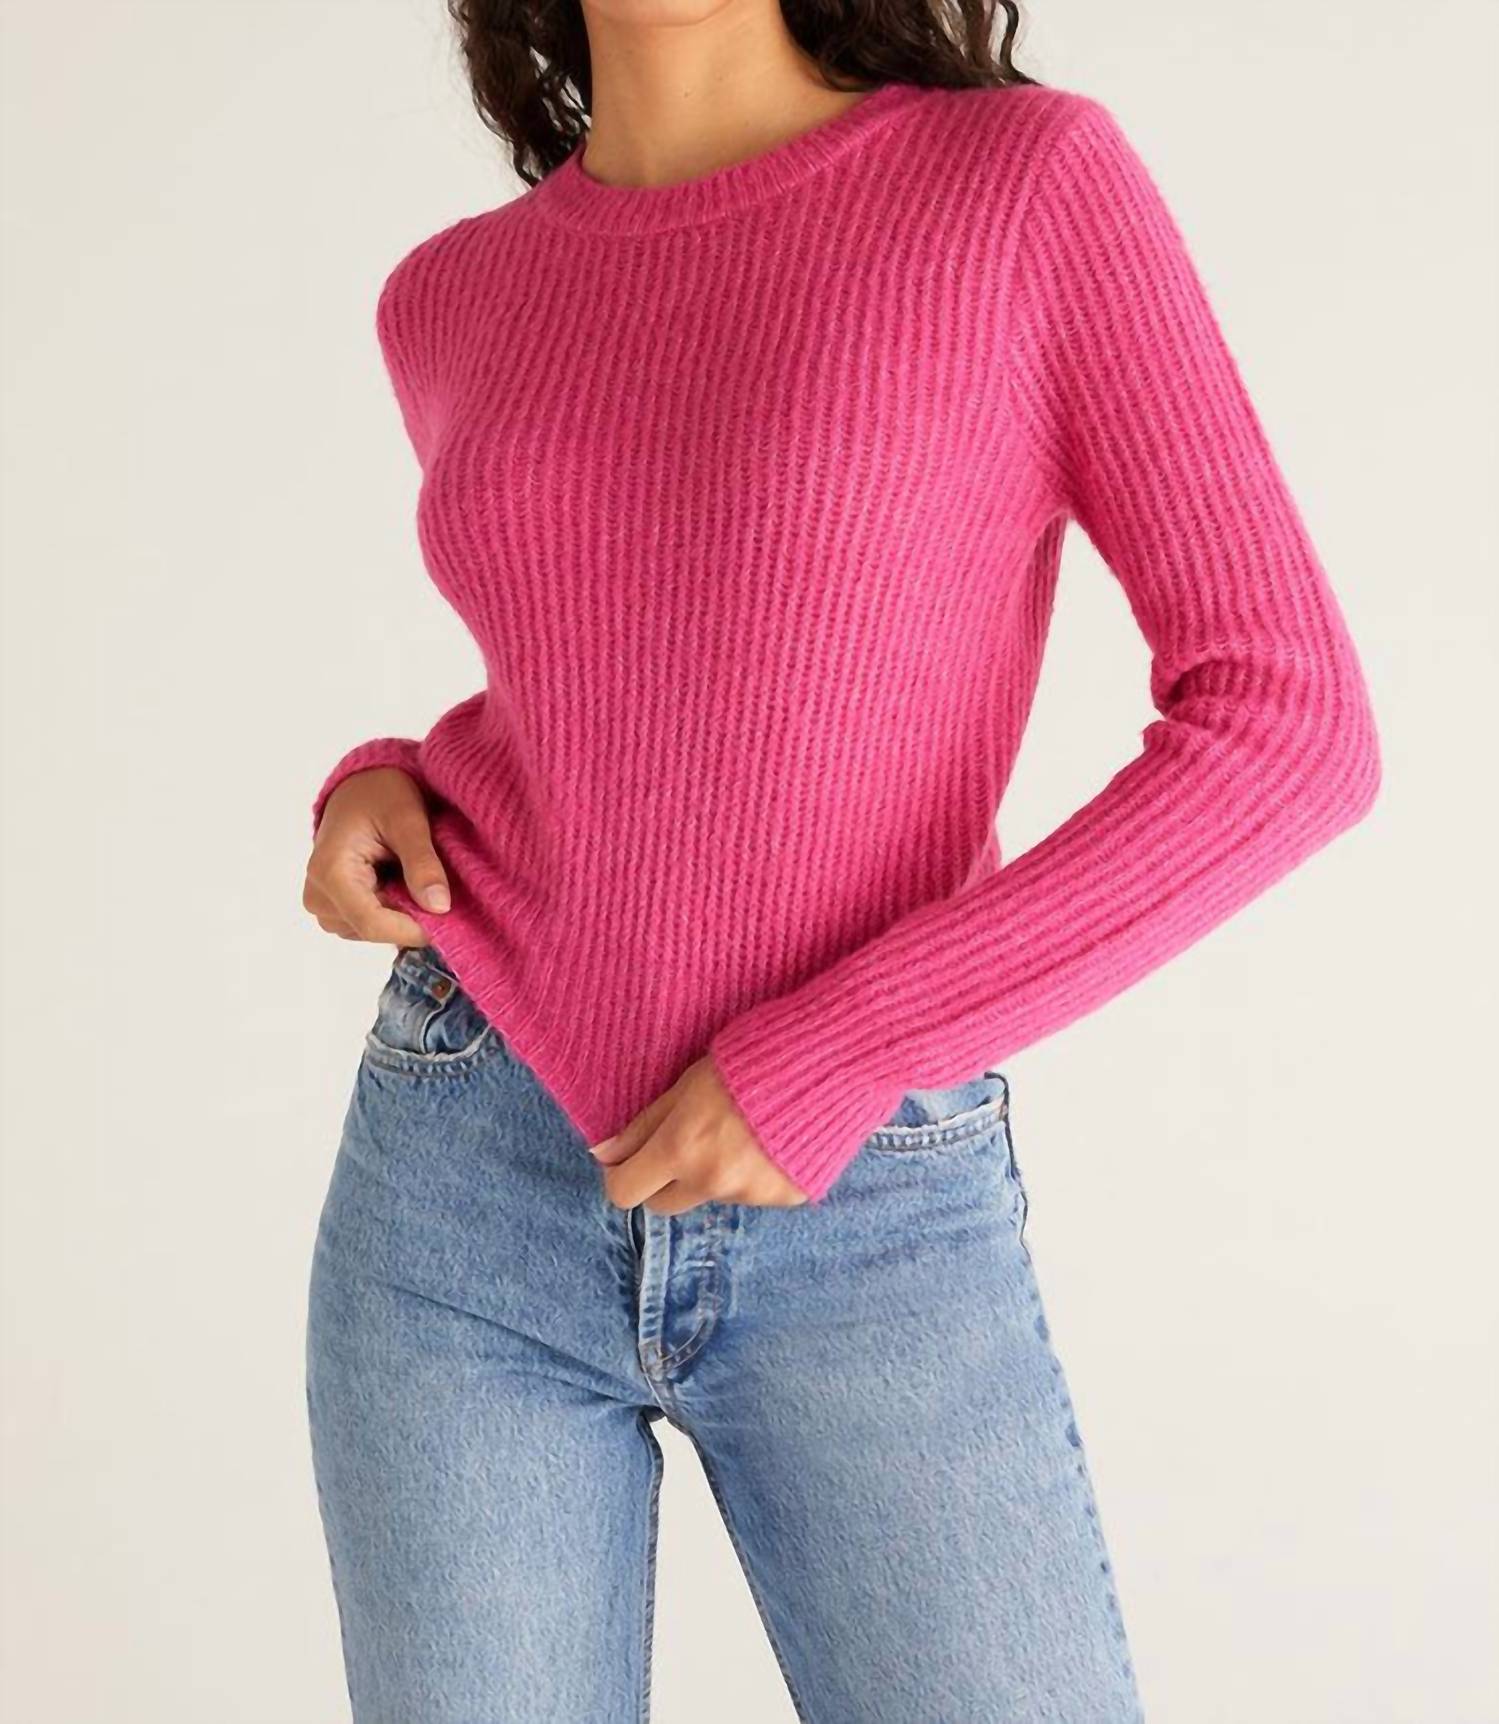 Z Supply Daphne Sweater In Punch Pink | Shop Premium Outlets